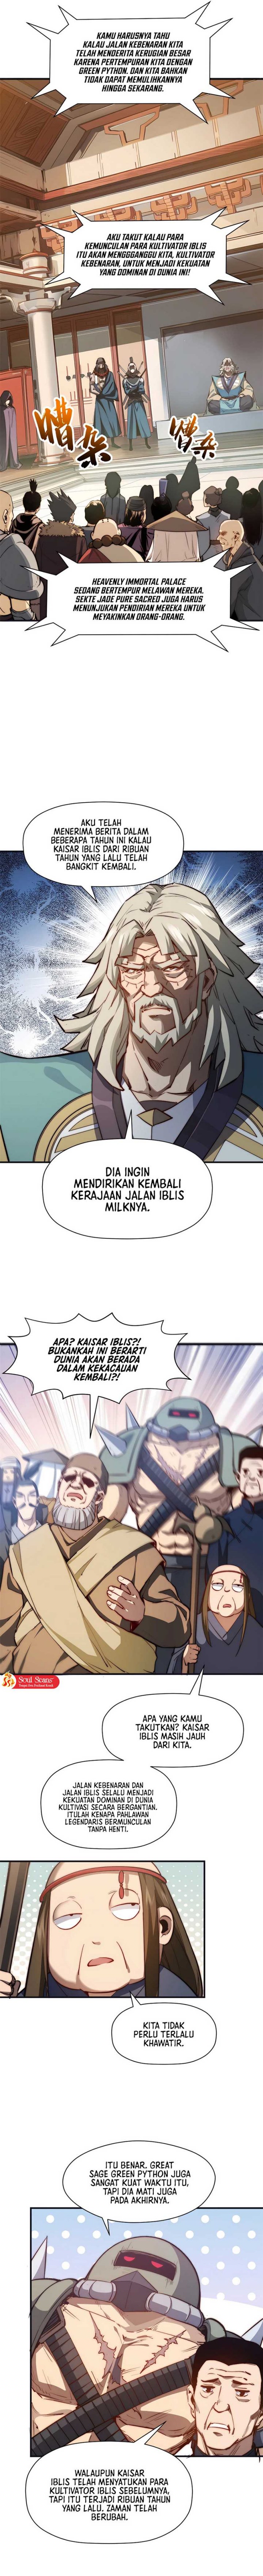 Dilarang COPAS - situs resmi www.mangacanblog.com - Komik top tier providence secretly cultivate for a thousand years 128 - chapter 128 129 Indonesia top tier providence secretly cultivate for a thousand years 128 - chapter 128 Terbaru 5|Baca Manga Komik Indonesia|Mangacan